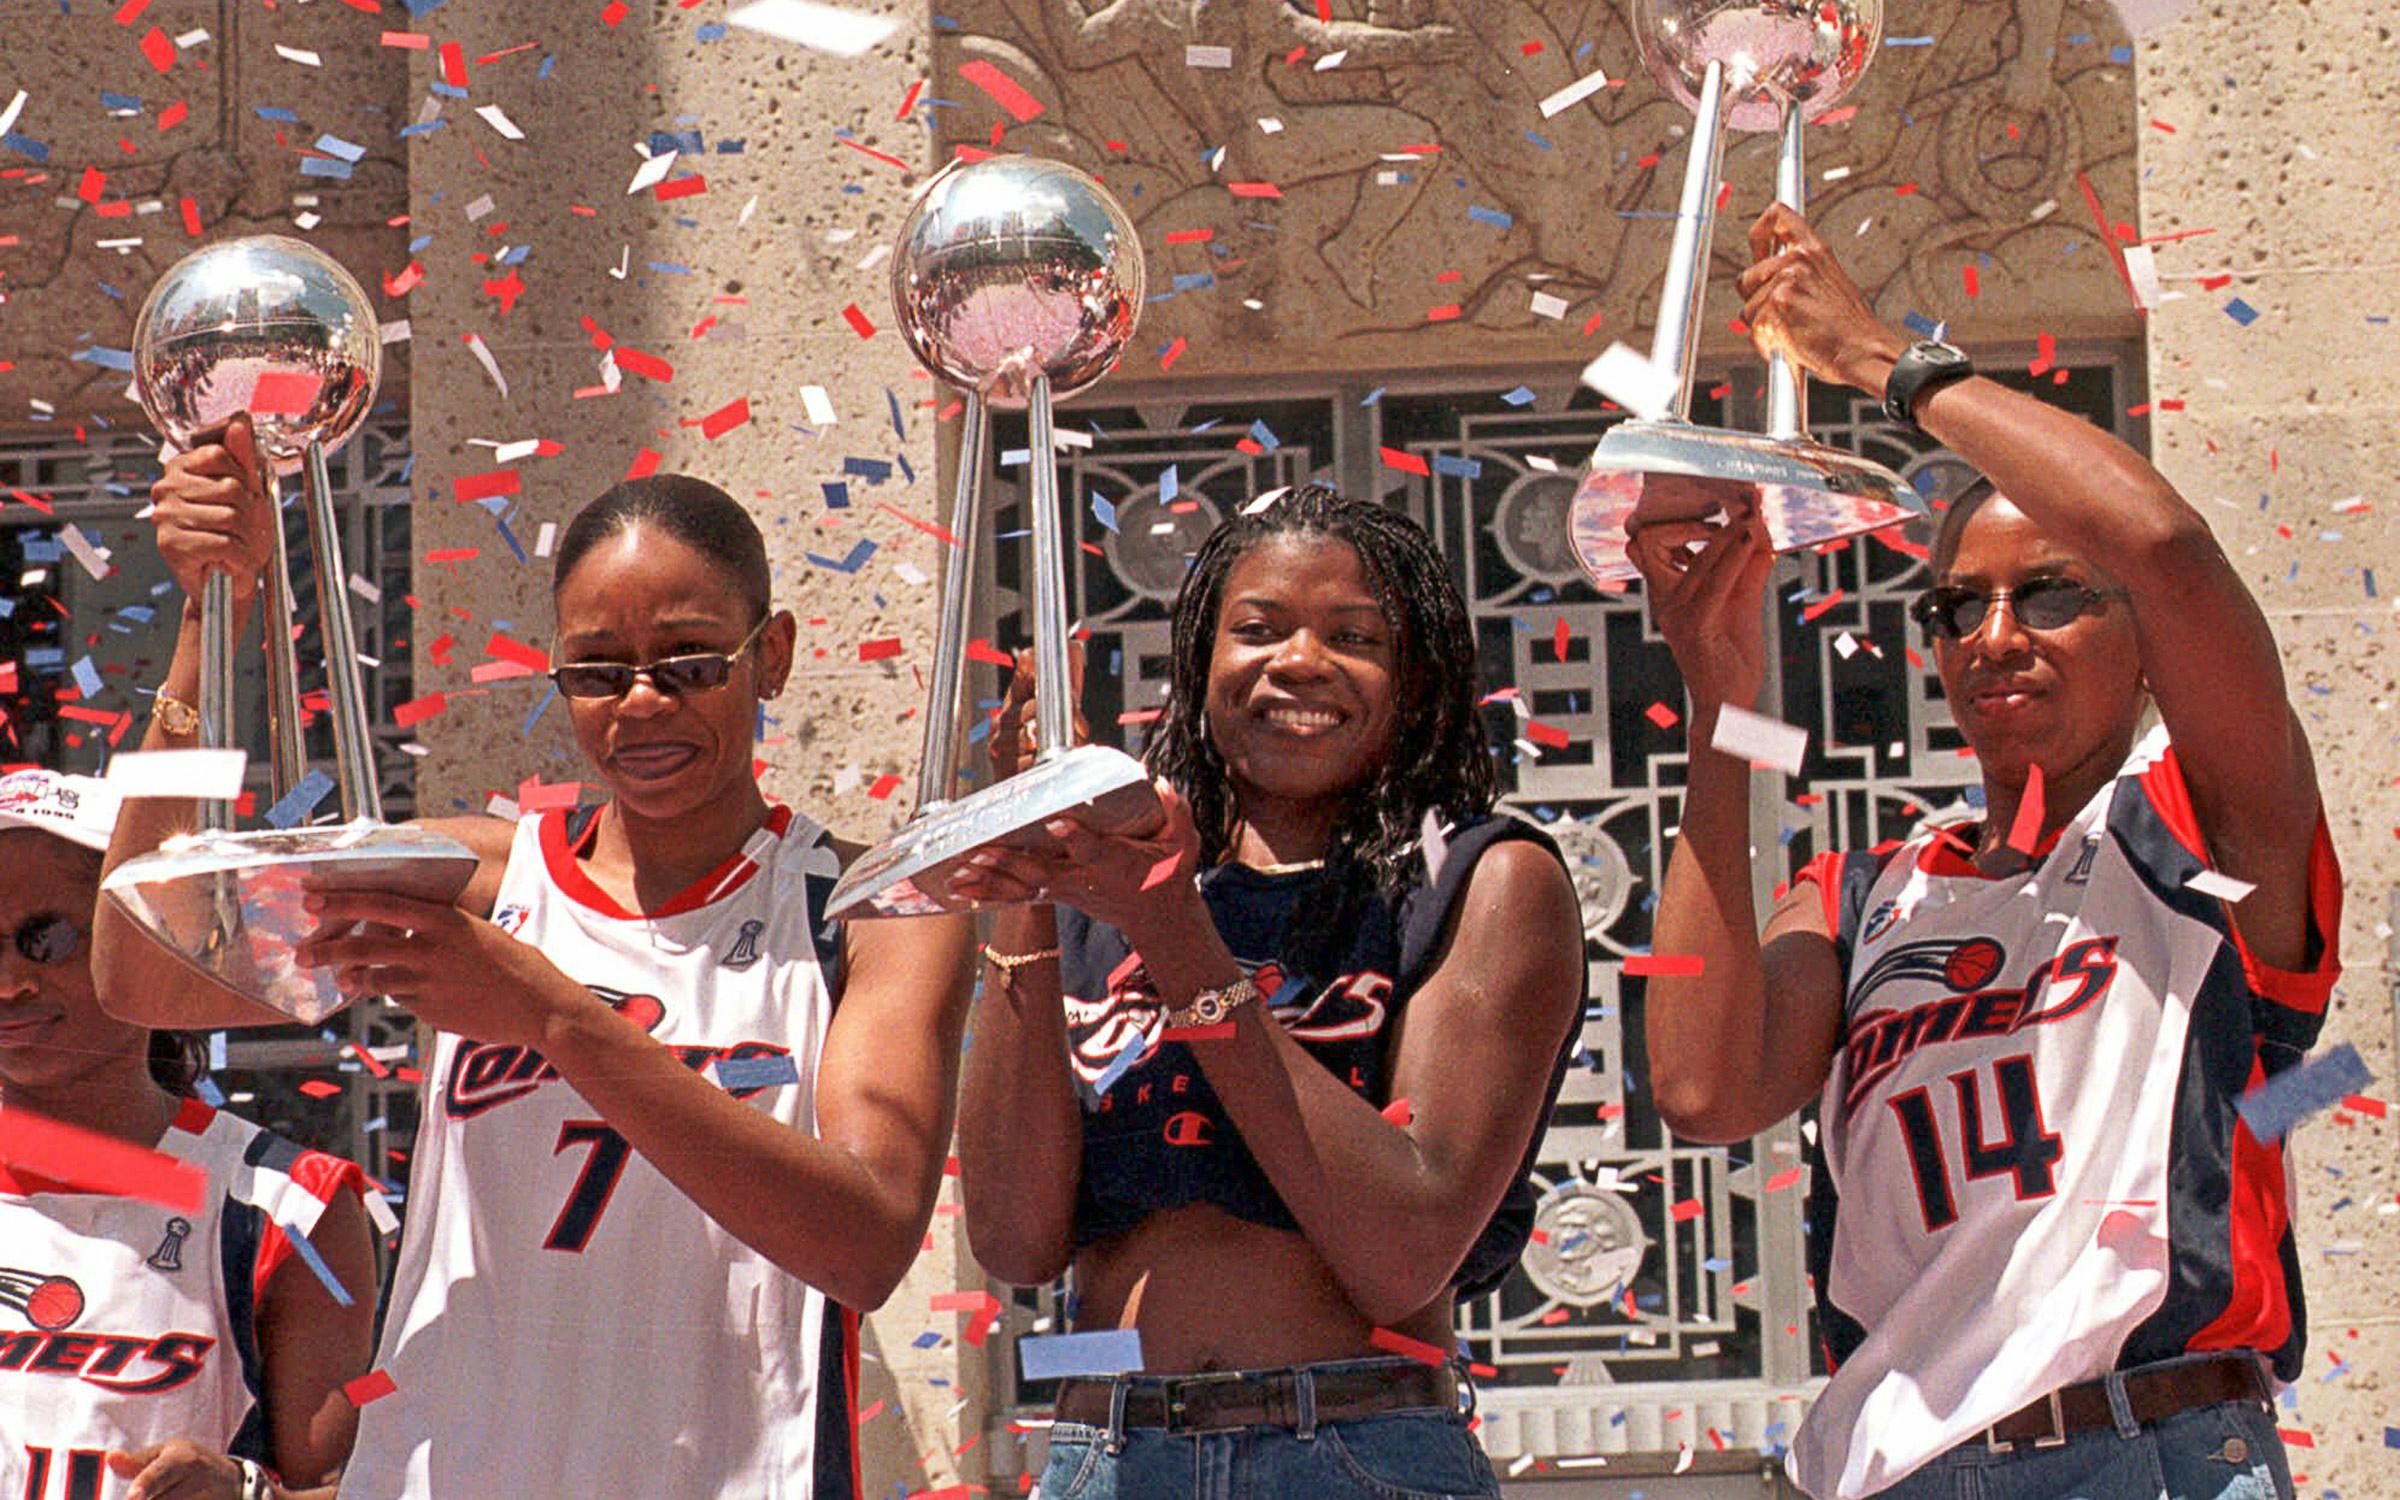 Houston's Comets, the rise and fall of the WNBA's first dynasty